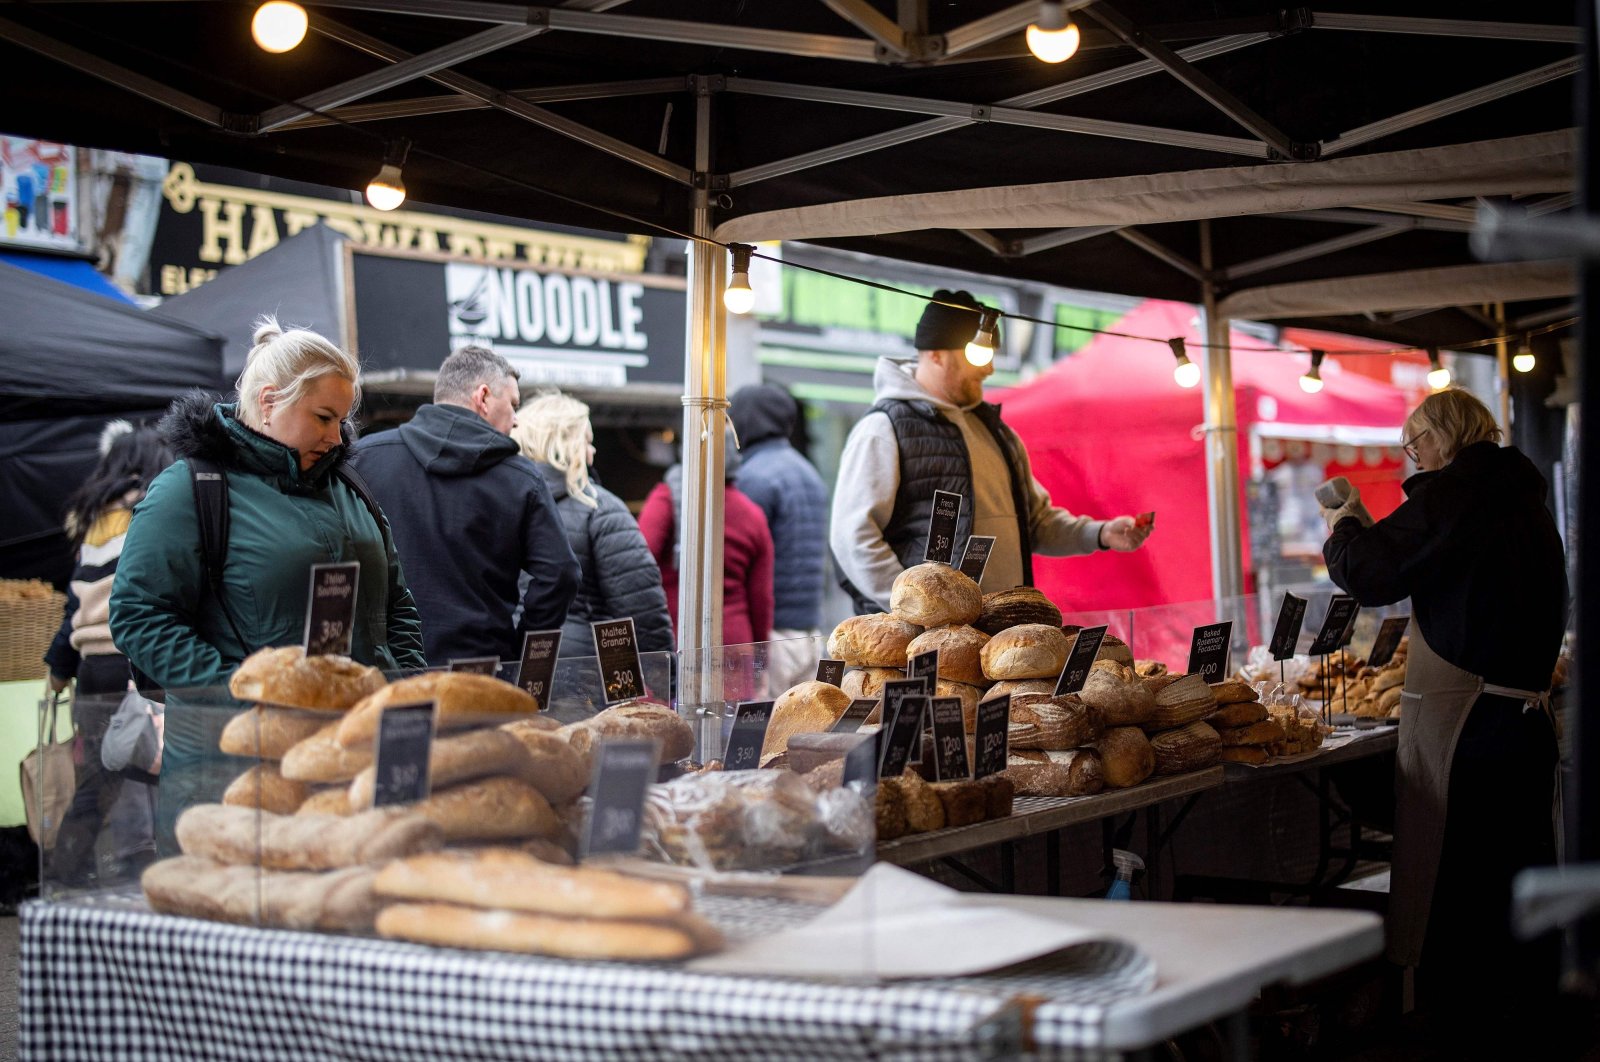 Customers shop for bread on a market stall in Walthamstow, east London, U.K., Feb. 13, 2022. (AFP Photo)